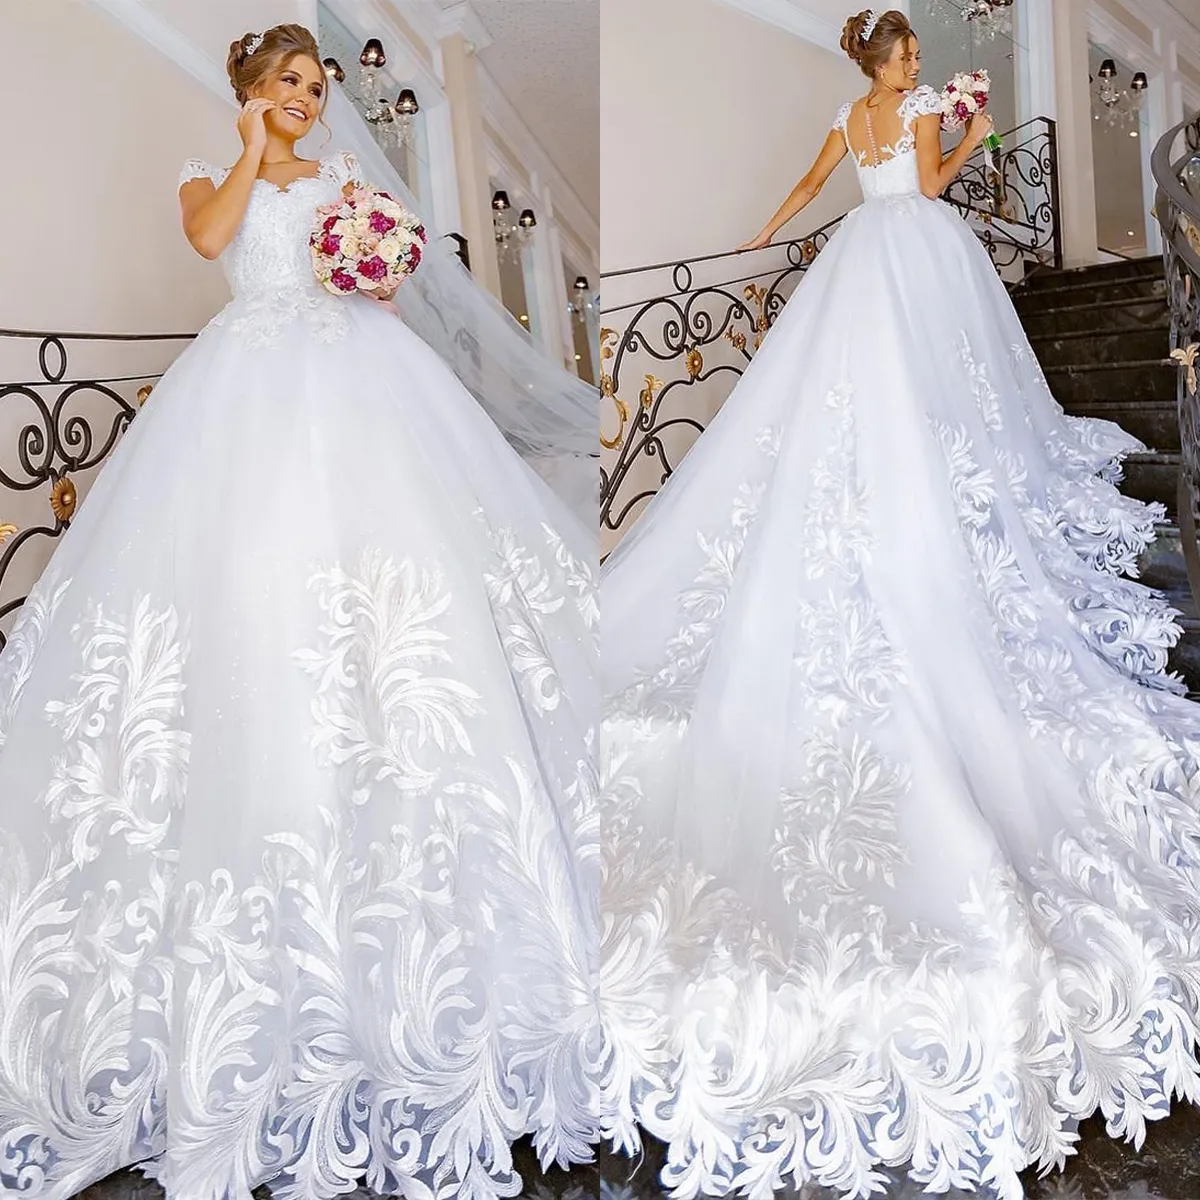 Elegant Ball Gown Wedding Dresses Sweetheart Short Sleeves Special Applicants Tulle Backless Chapel Gown Tulle Custom Made Bridal Gown Vestidos De Novia